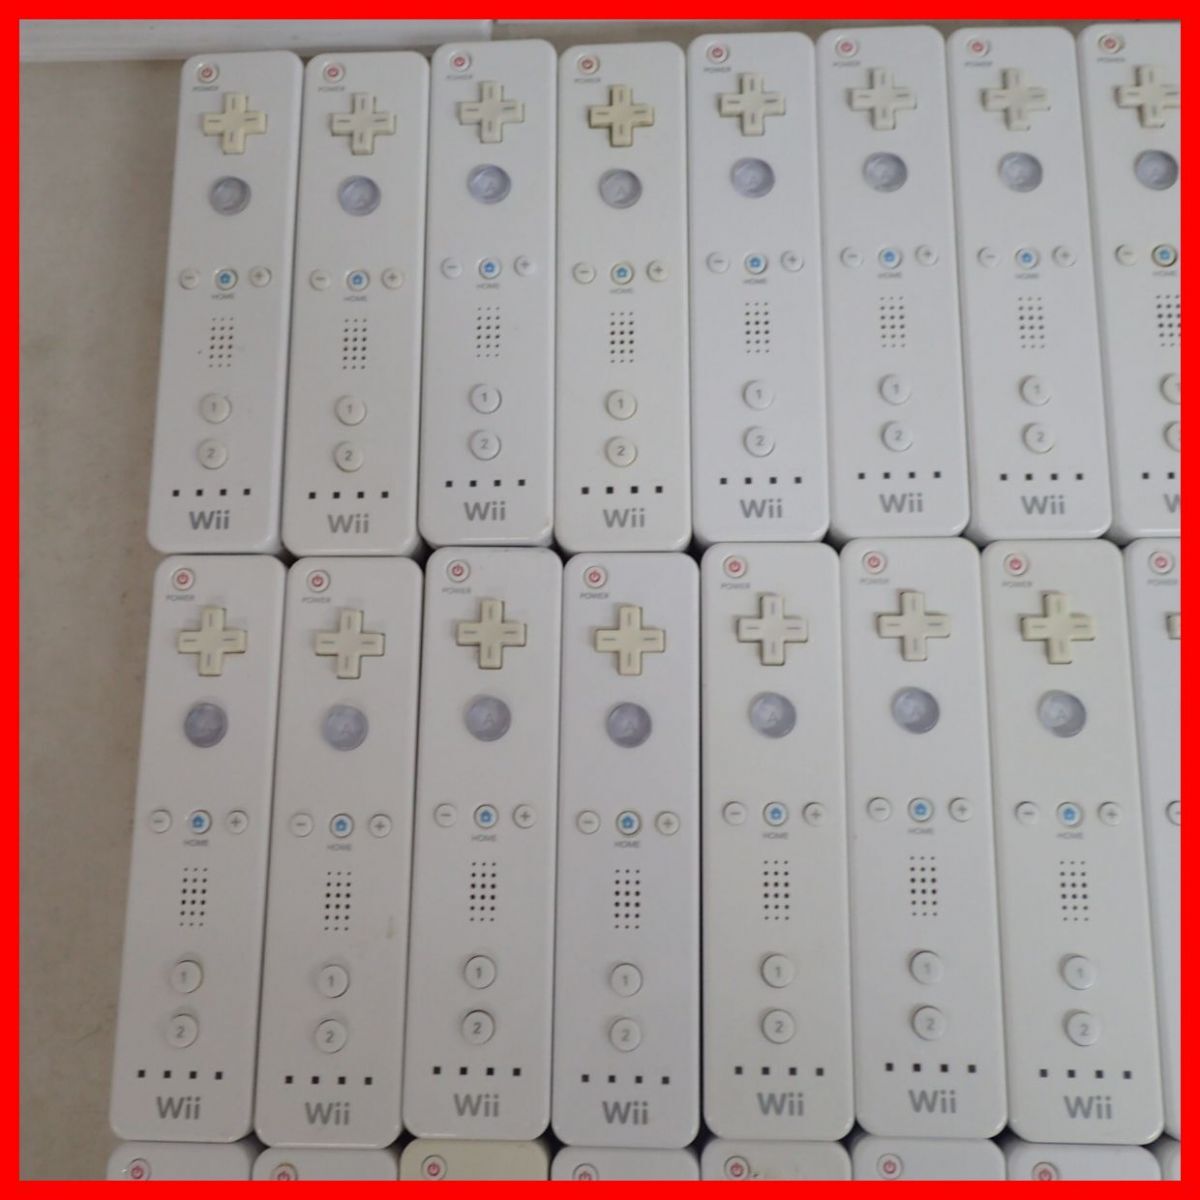 Wii remote control controller RVL-003 white together 50 piece large amount set nintendo Nintendo silicon with cover [20